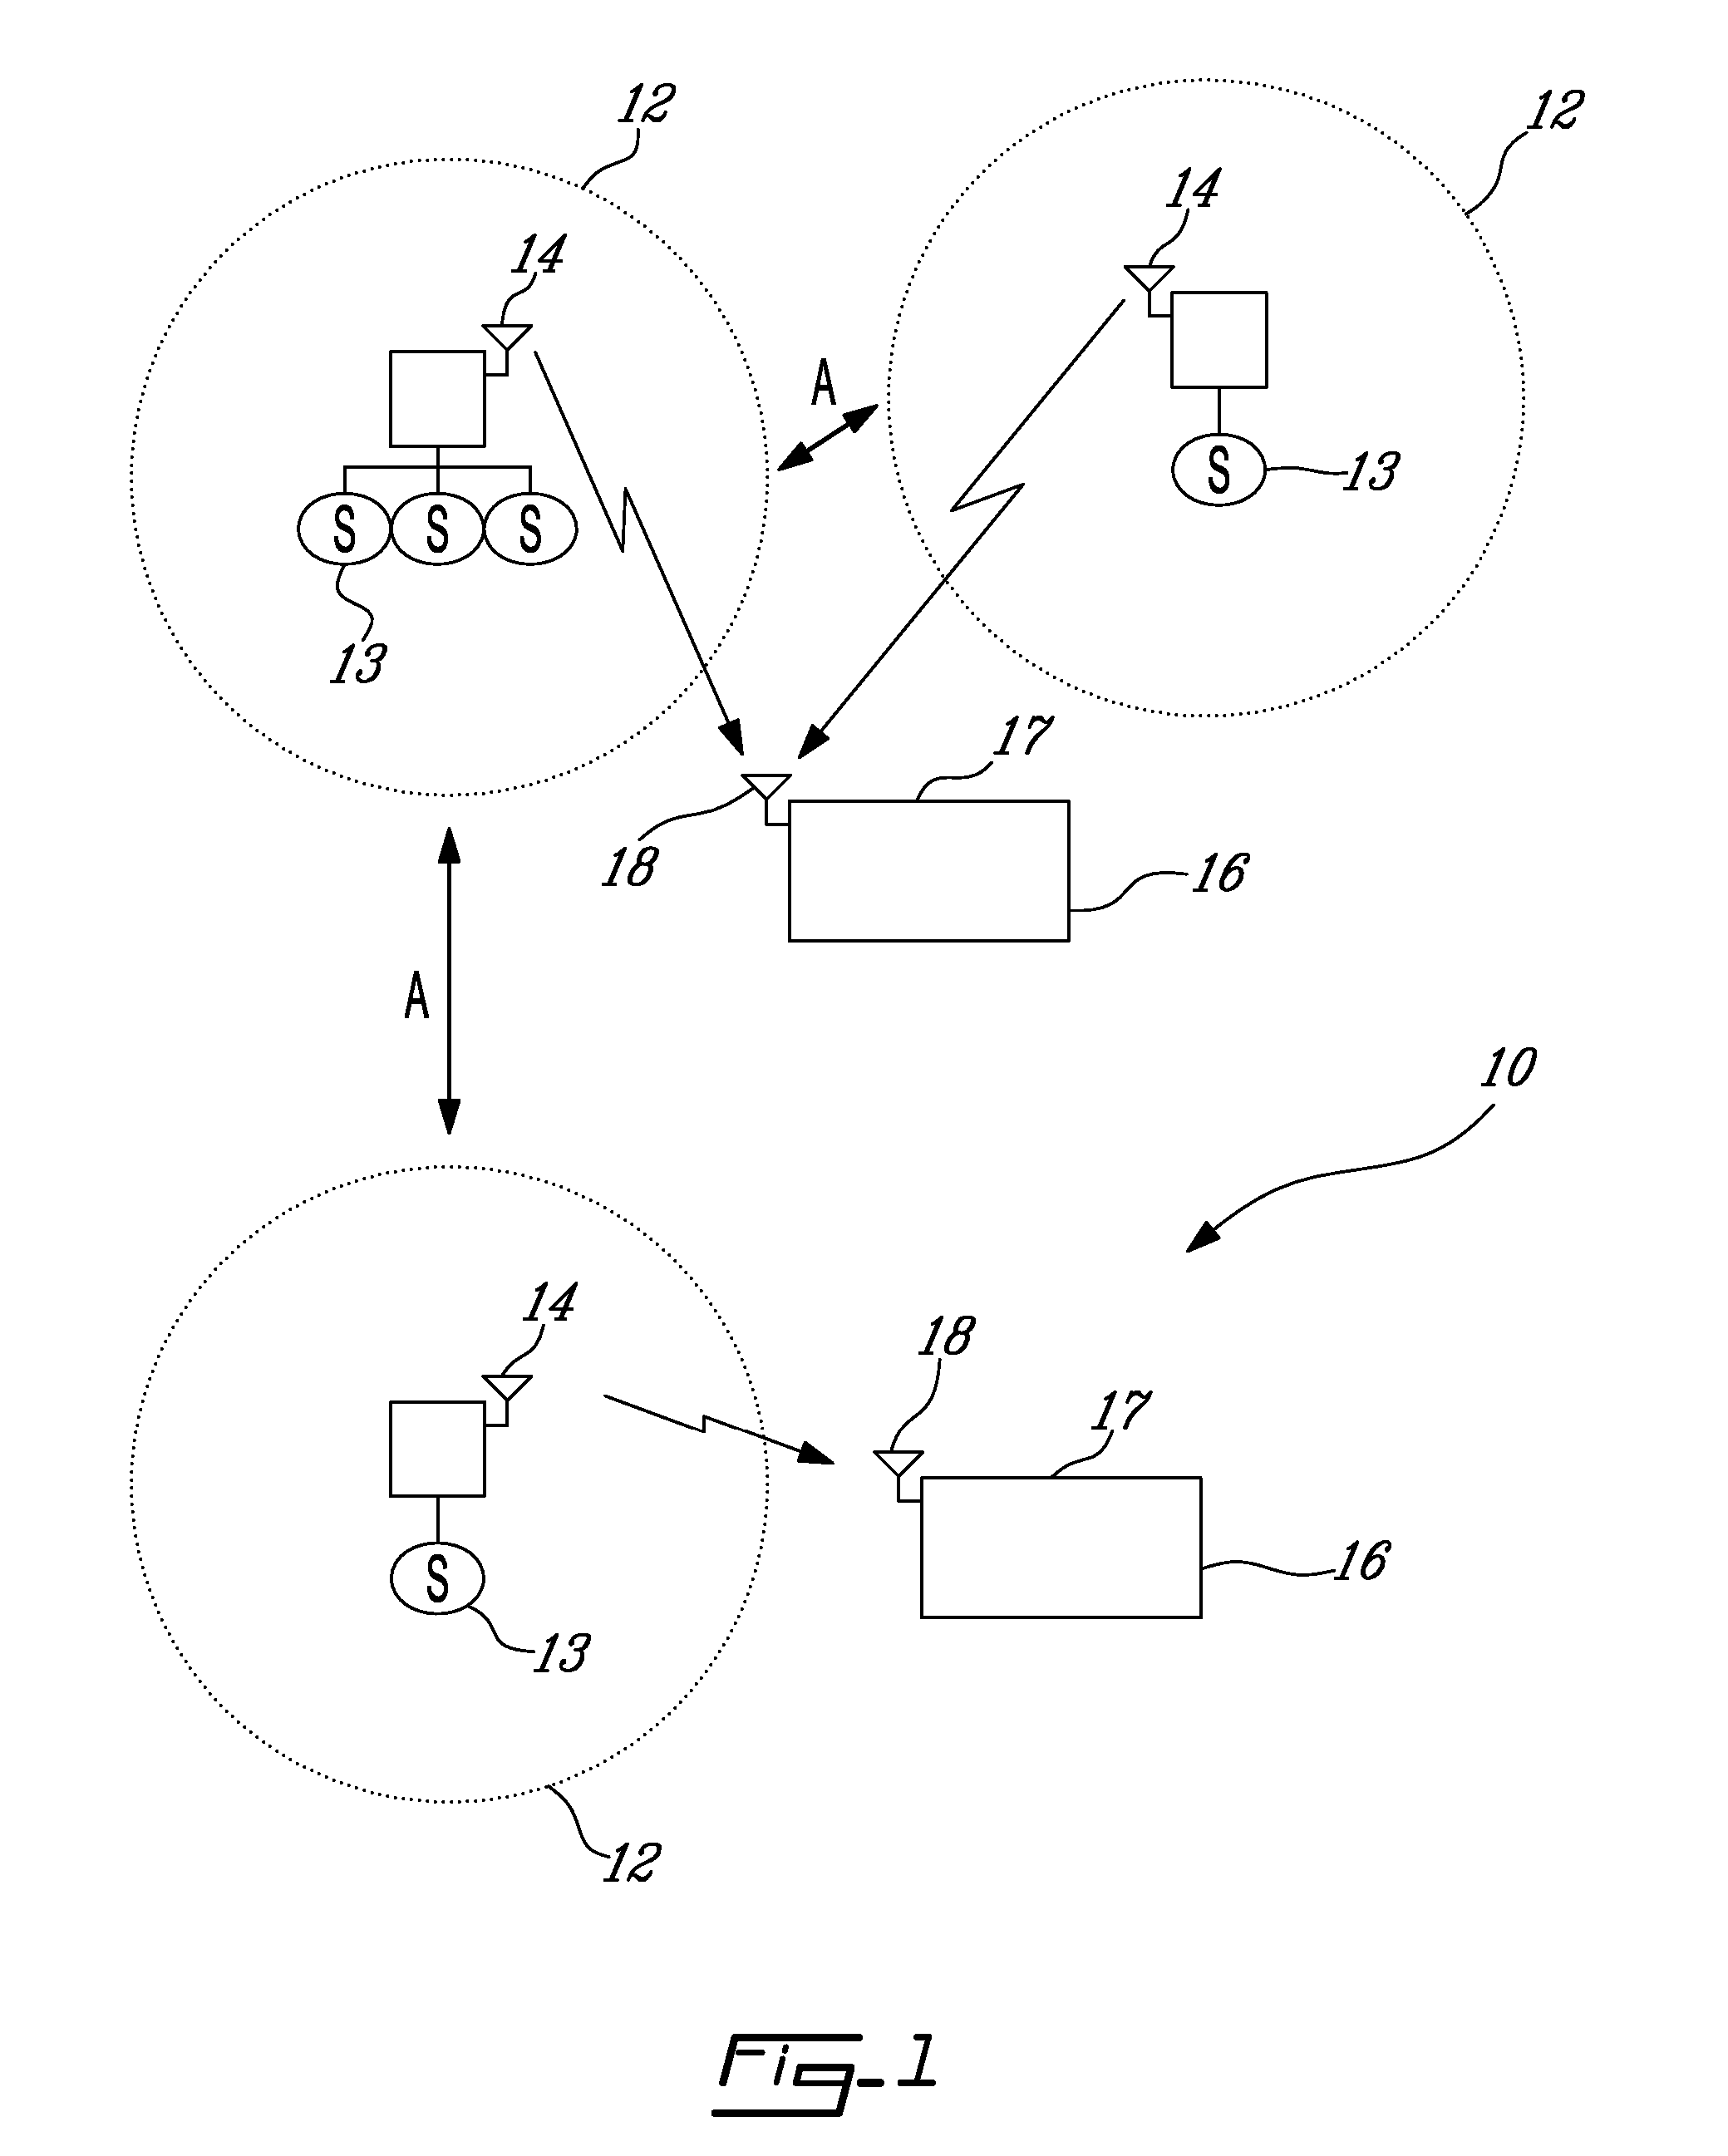 Automatic channel switching method for low-power communication devices